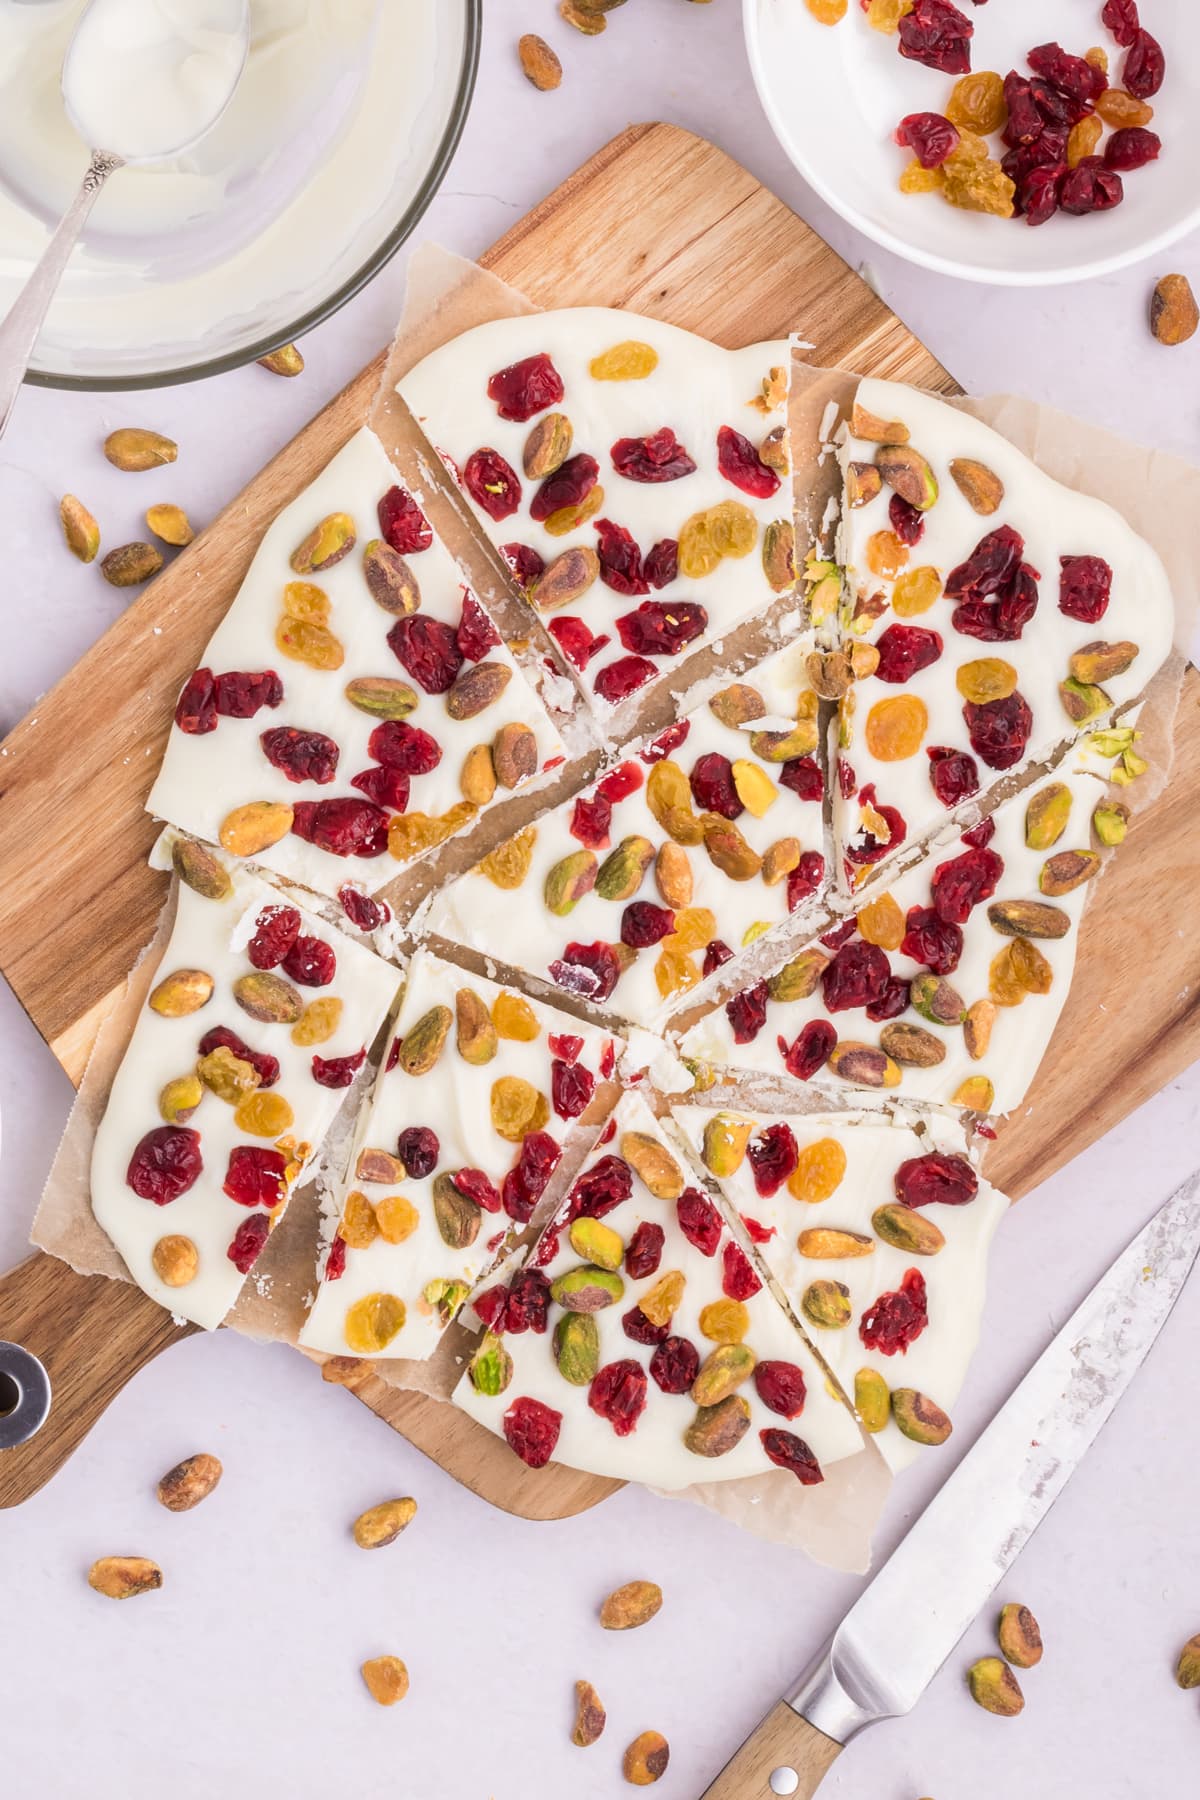 Pieces of cranberry pistachio bark on a wood cutting board.